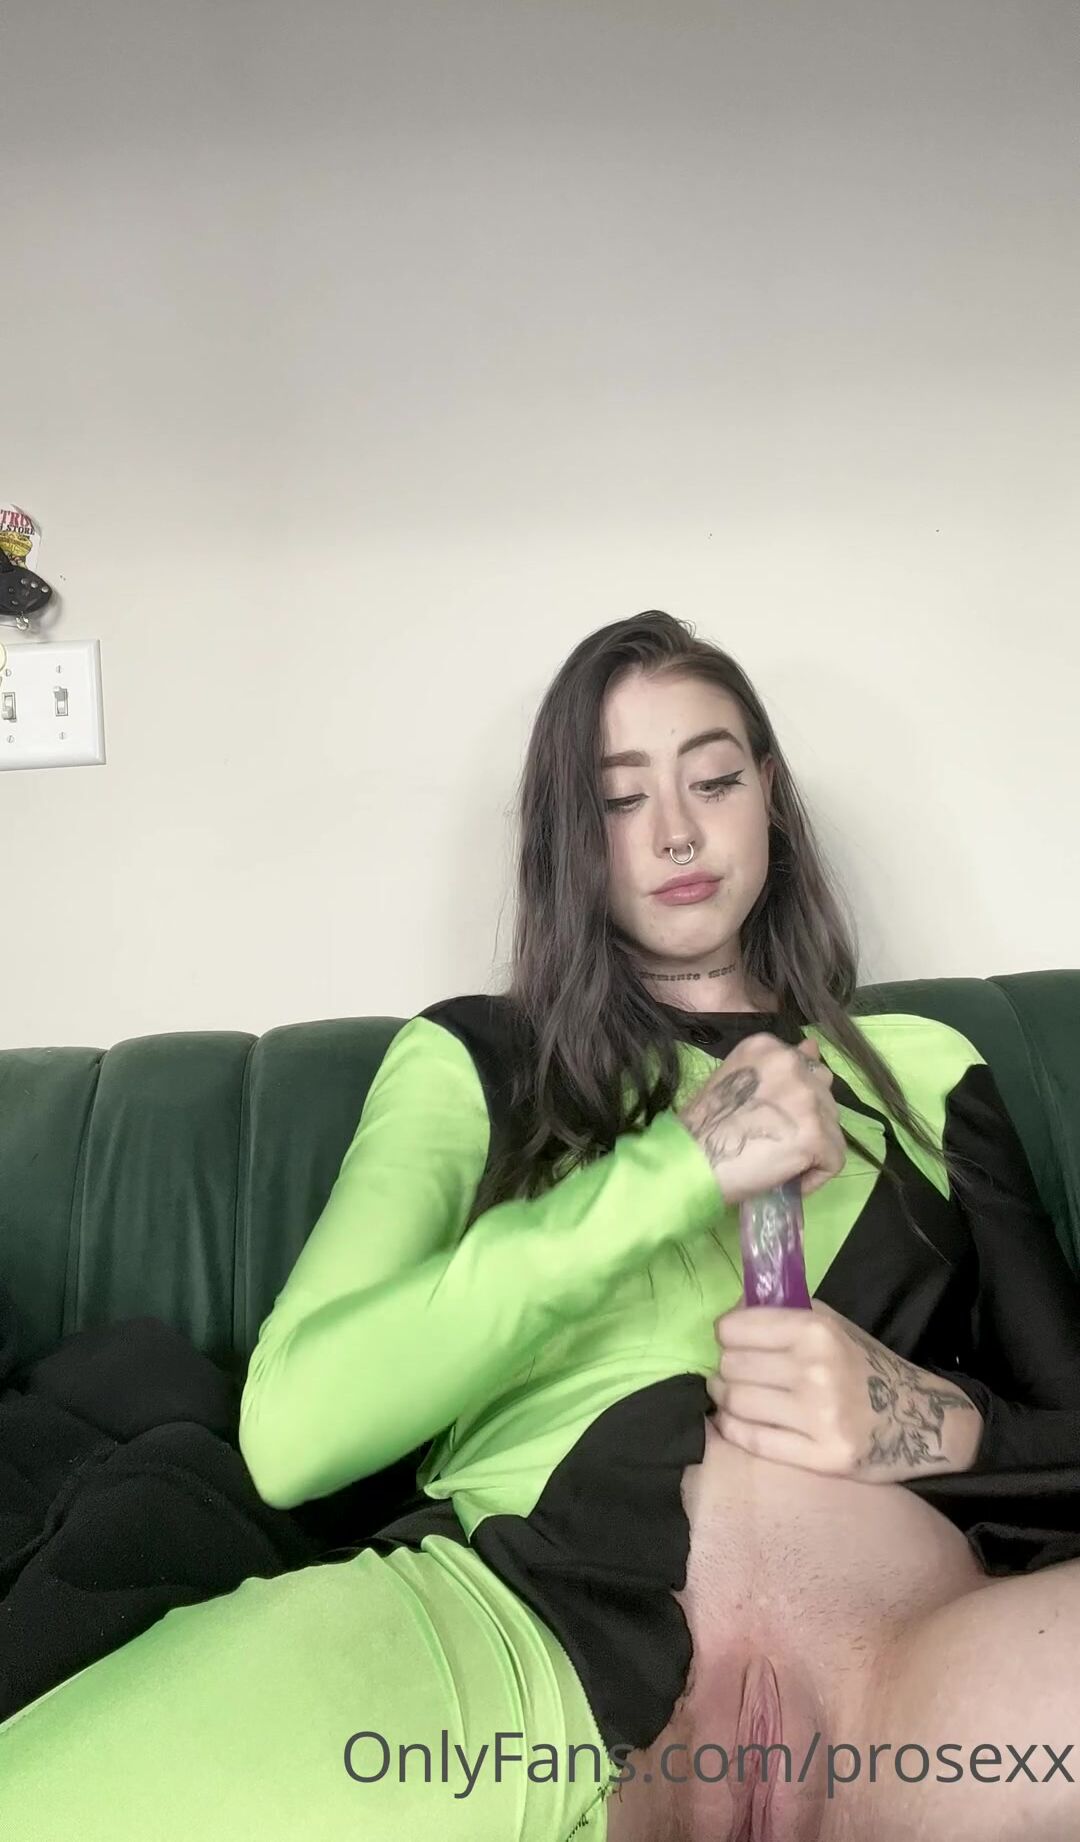 Astrofairy444 - shego tells you what to do joi - Thothub